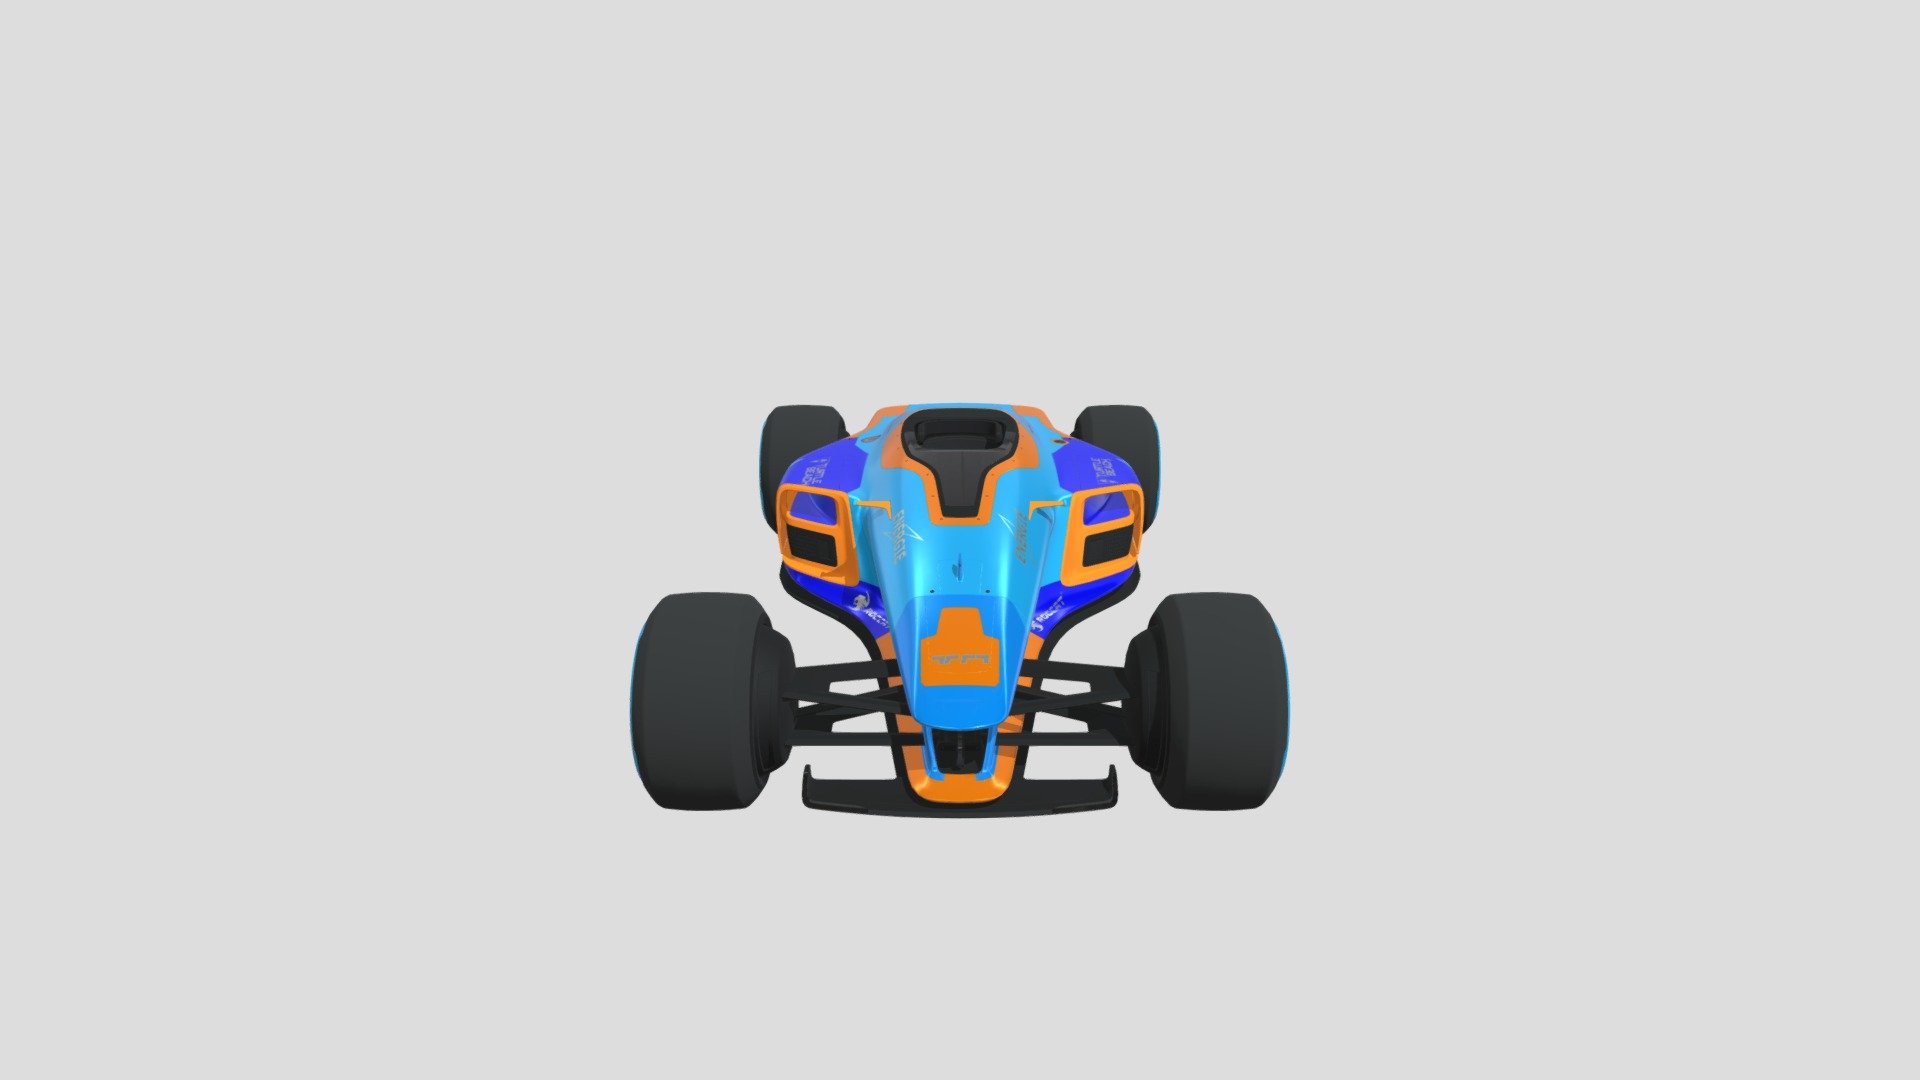 Trackmania Skin made with Blender.

If you also play Trackmania and want to use this Skin, you will find it the Sonic Rivals Club.

You can also download the 3D - Model to have a Template if you want to start skining Trackmania Cars for yourself 3d model